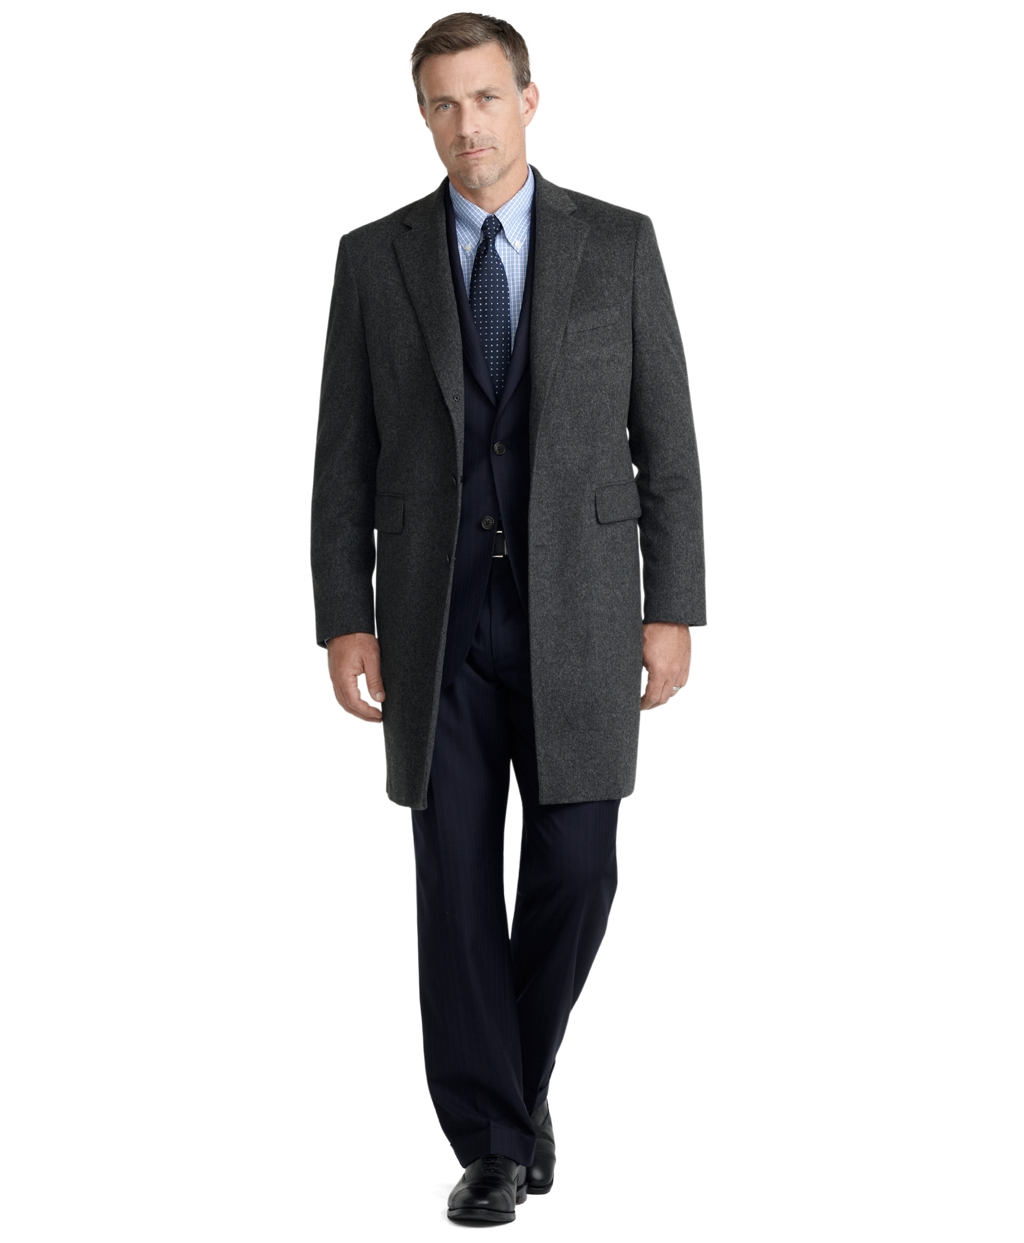 Lyst - Brooks Brothers Wool Mason Topcoat in Gray for Men